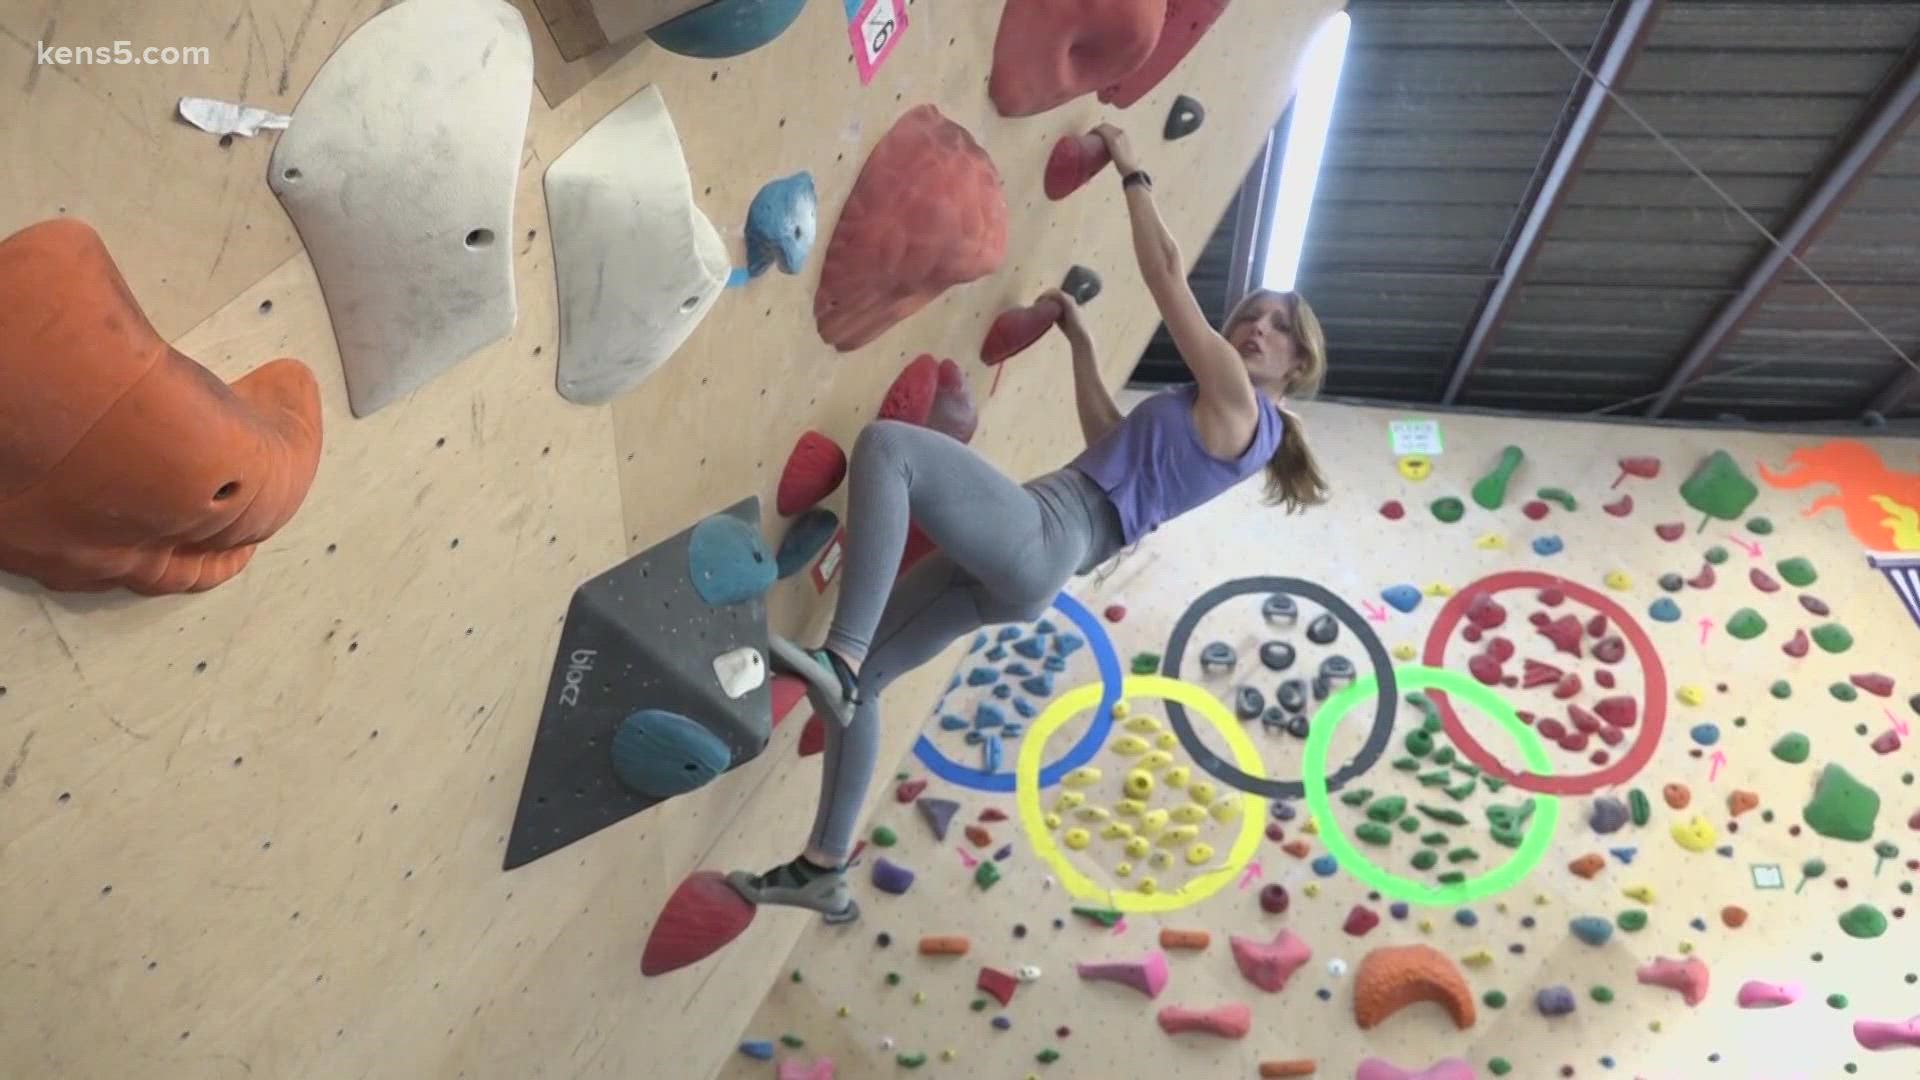 The locally-owned indoor bouldering gym is in downtown San Antonio. It has more than 100 boulder problems, which are like puzzles for your mind and body to solve.